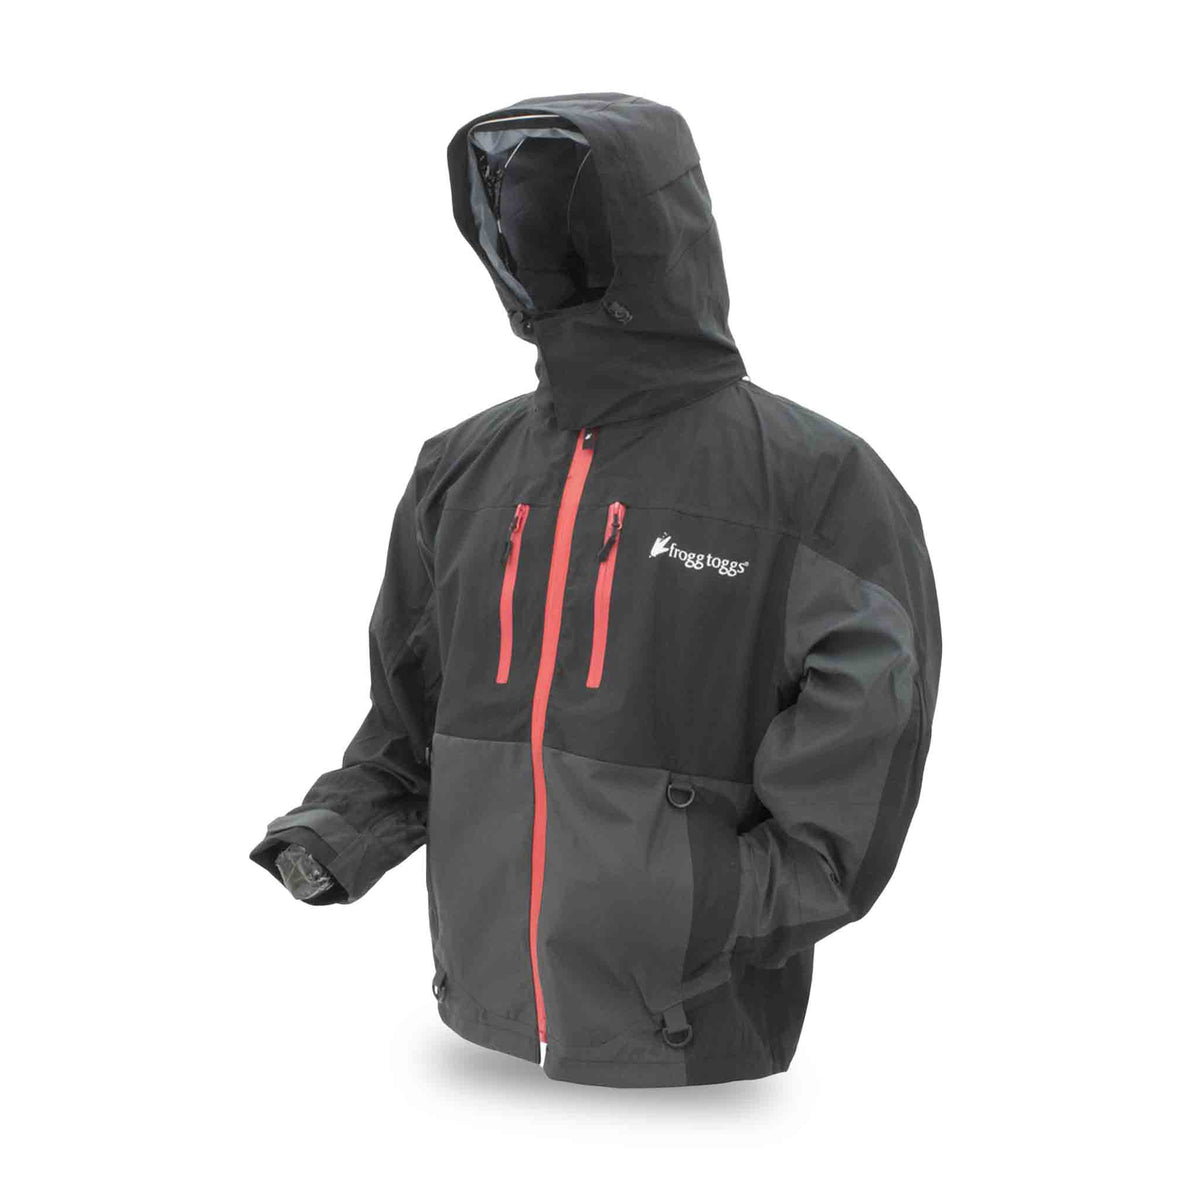 Frogg Toggs Pilot II Guide Jacket Black / Charcoal S Jackets